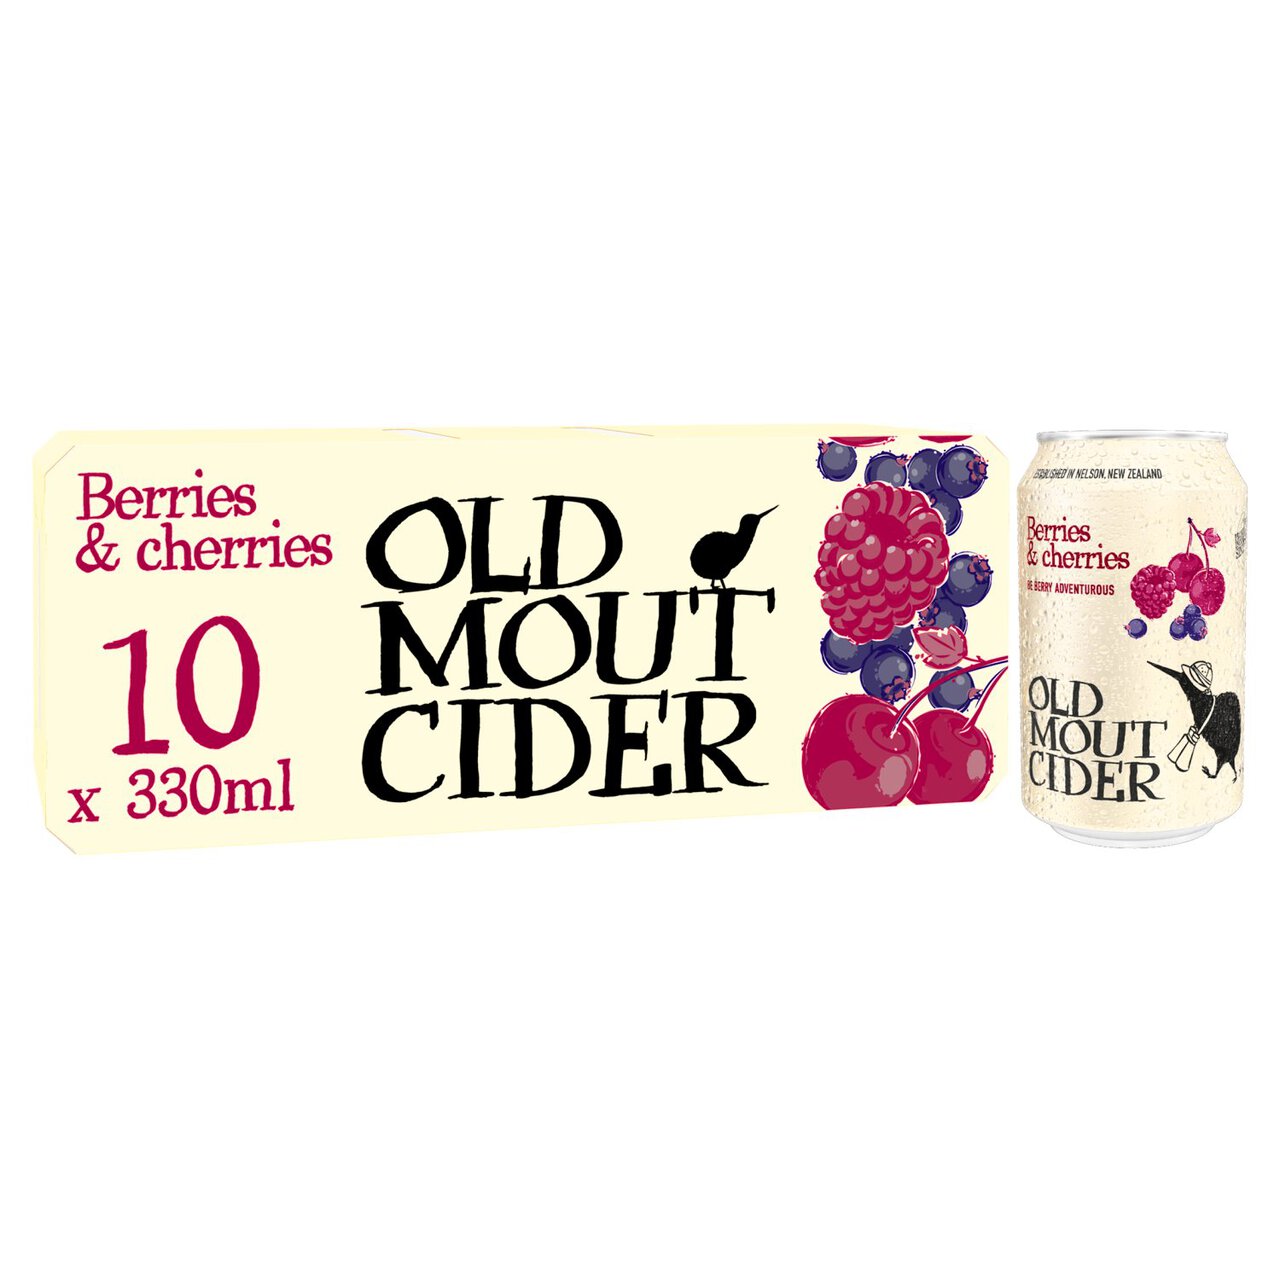 Old Mout Berries & Cherries Cider Cans 10 x 330ml